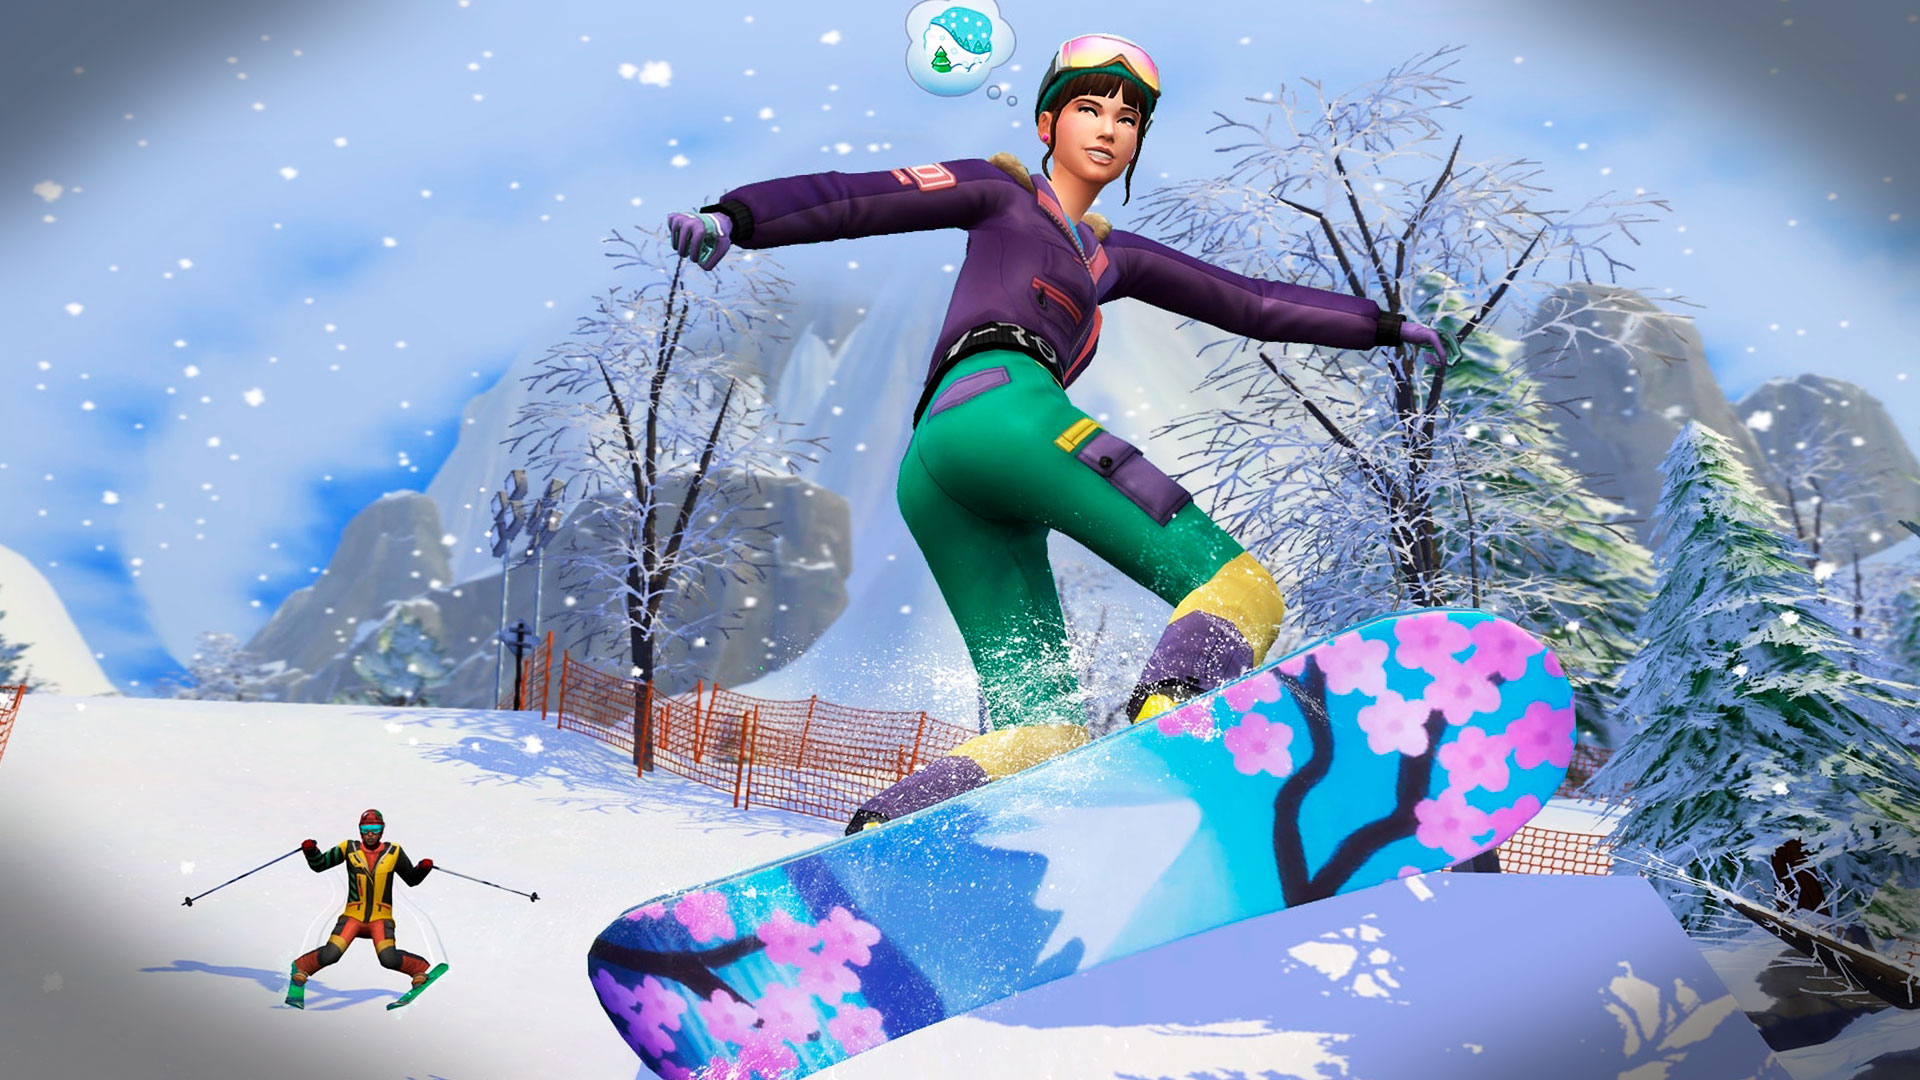 The sims 4 snowy